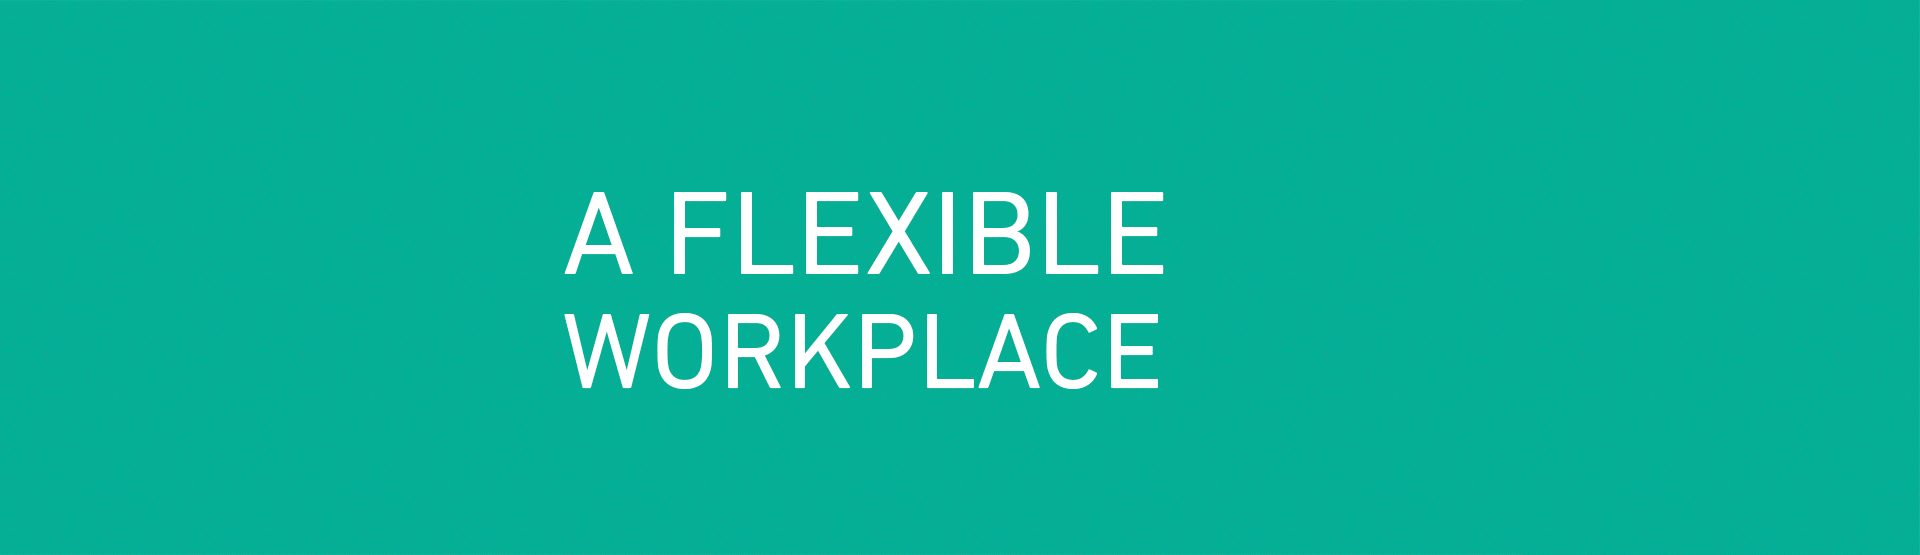 A flexible workplace